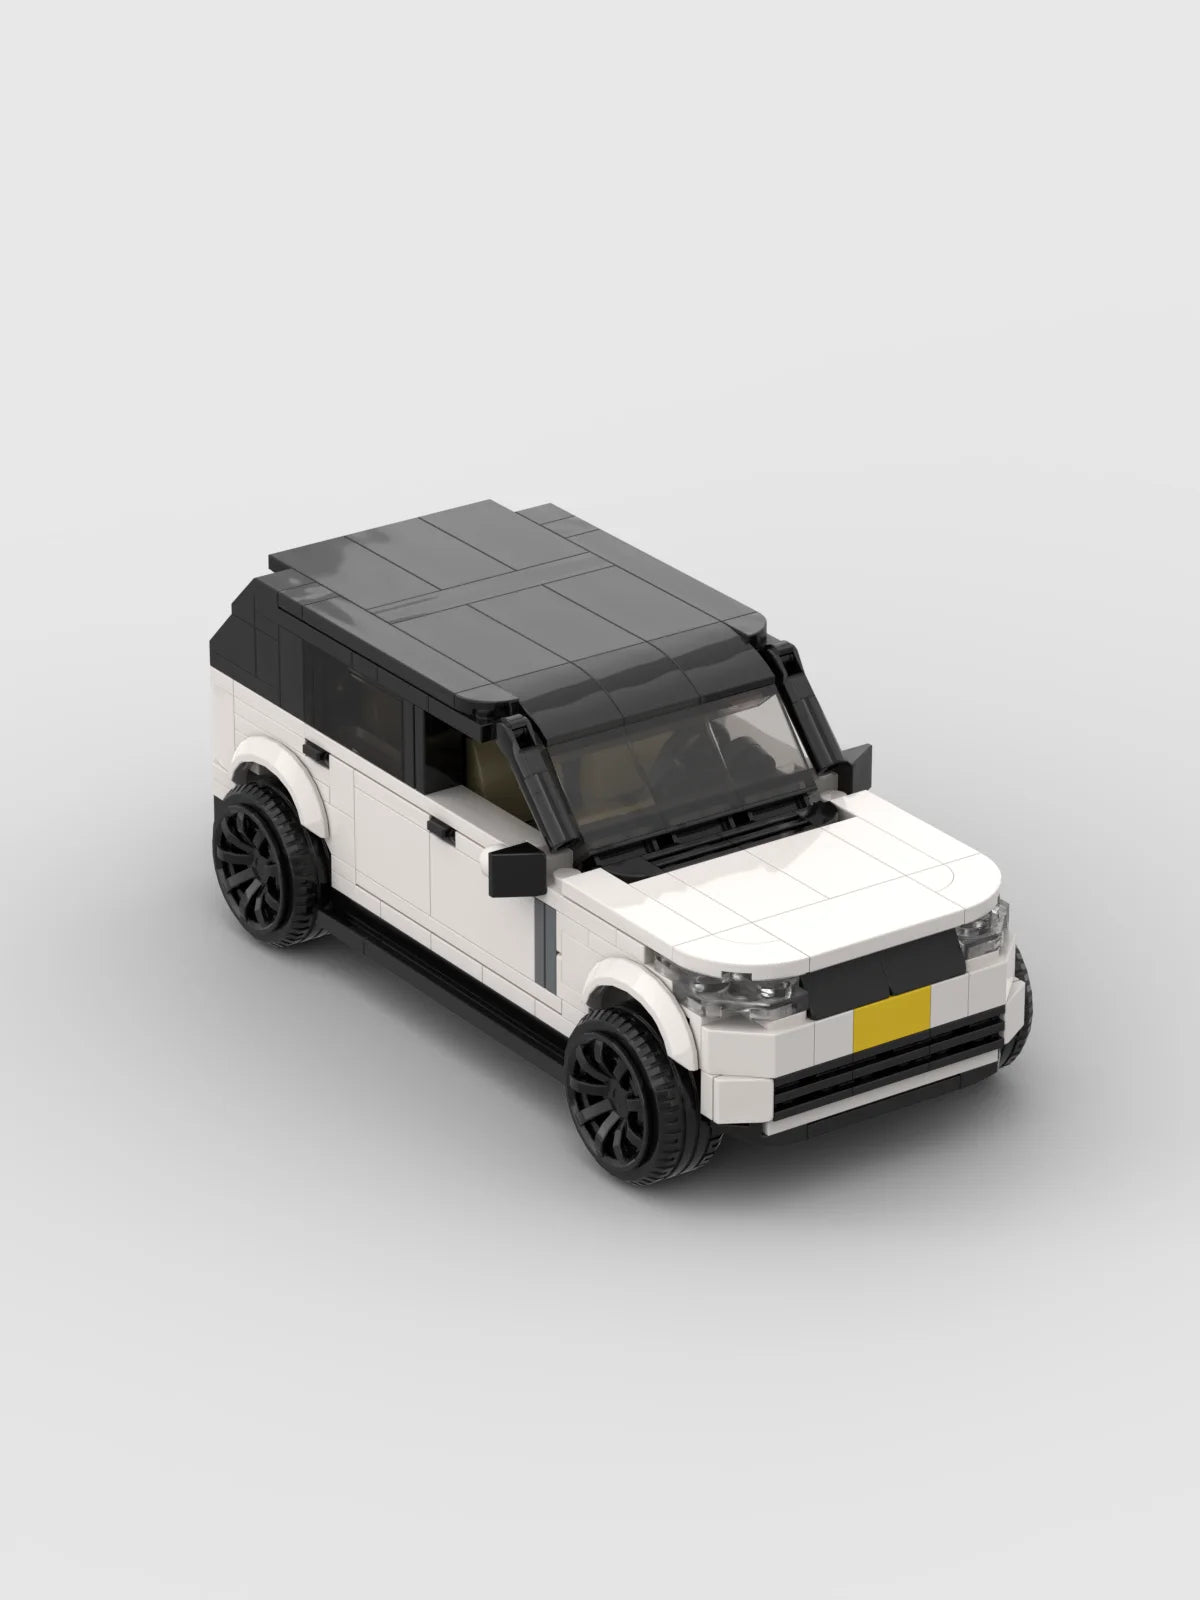 Land Rover Range Rover made from lego building blocks